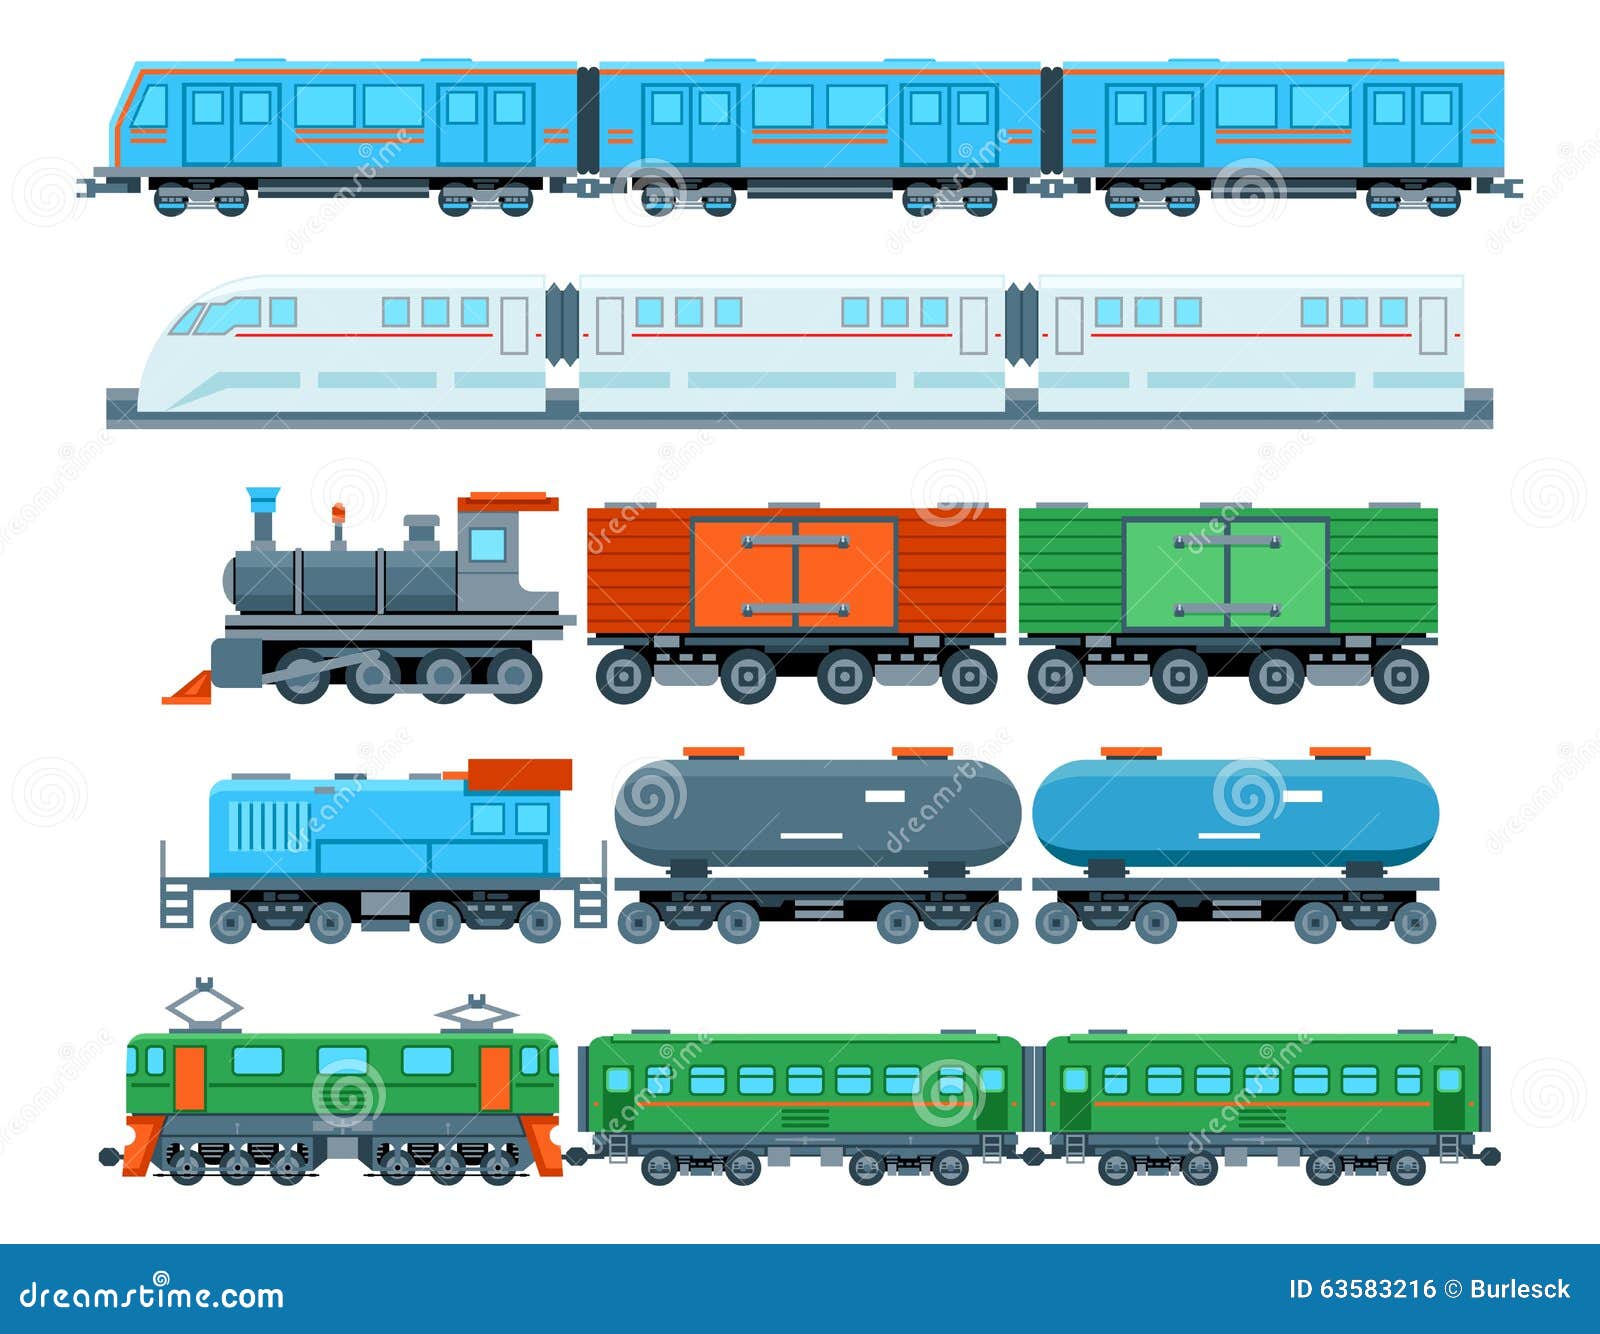 railway trains in flat style